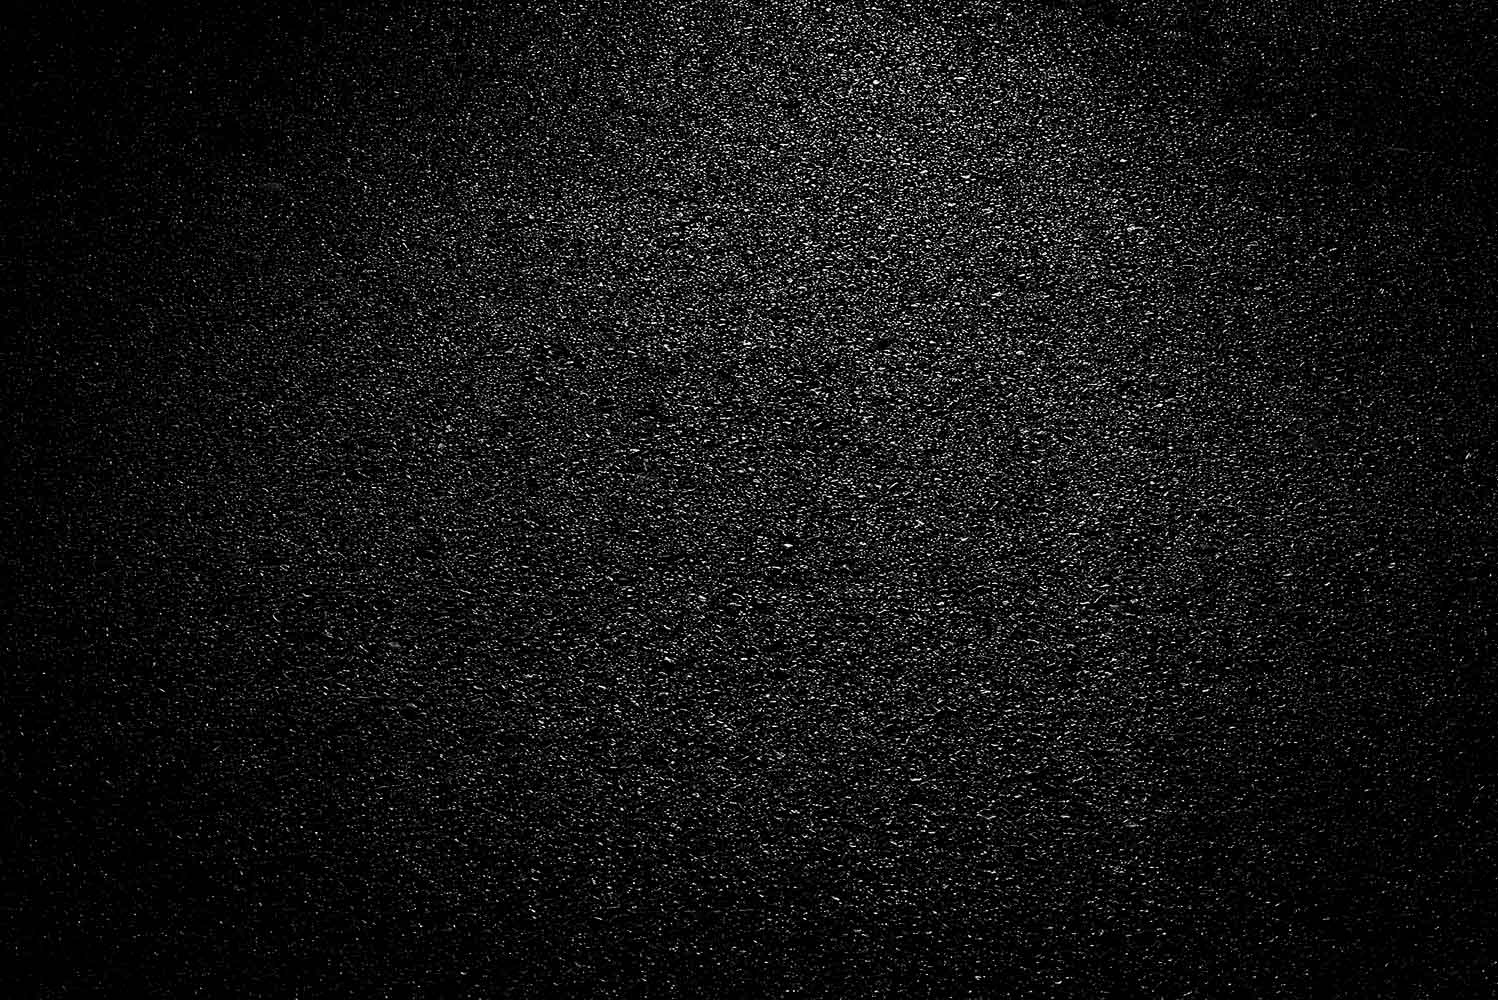 Image: Black background with many tiny white dots that imply a starry night sky.